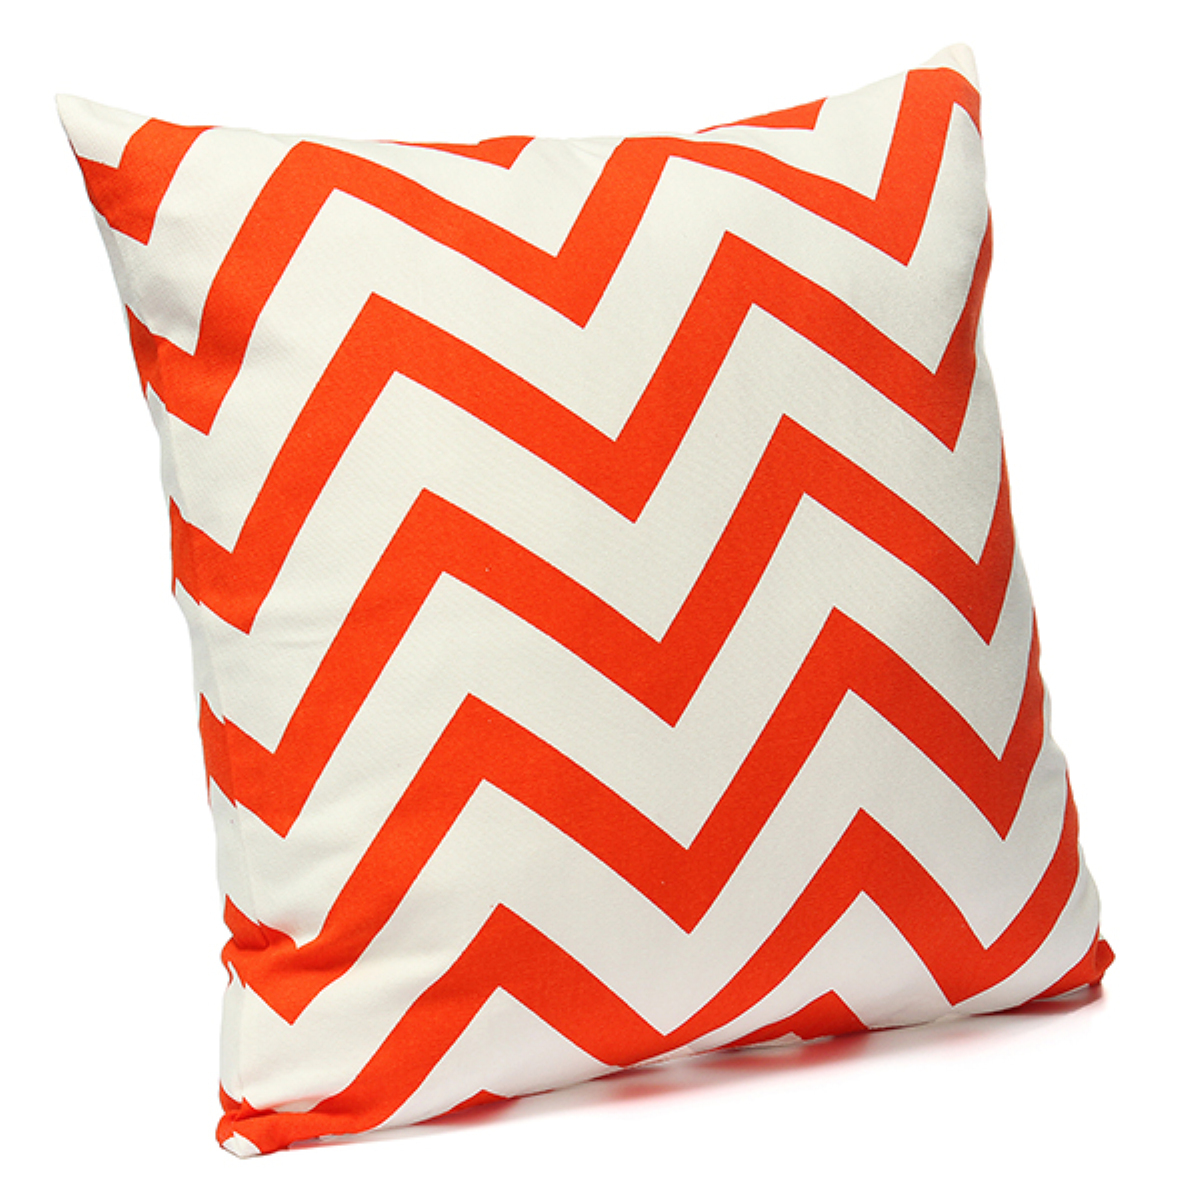 Vintage Printed Cushion Cover Throw Pillow Case